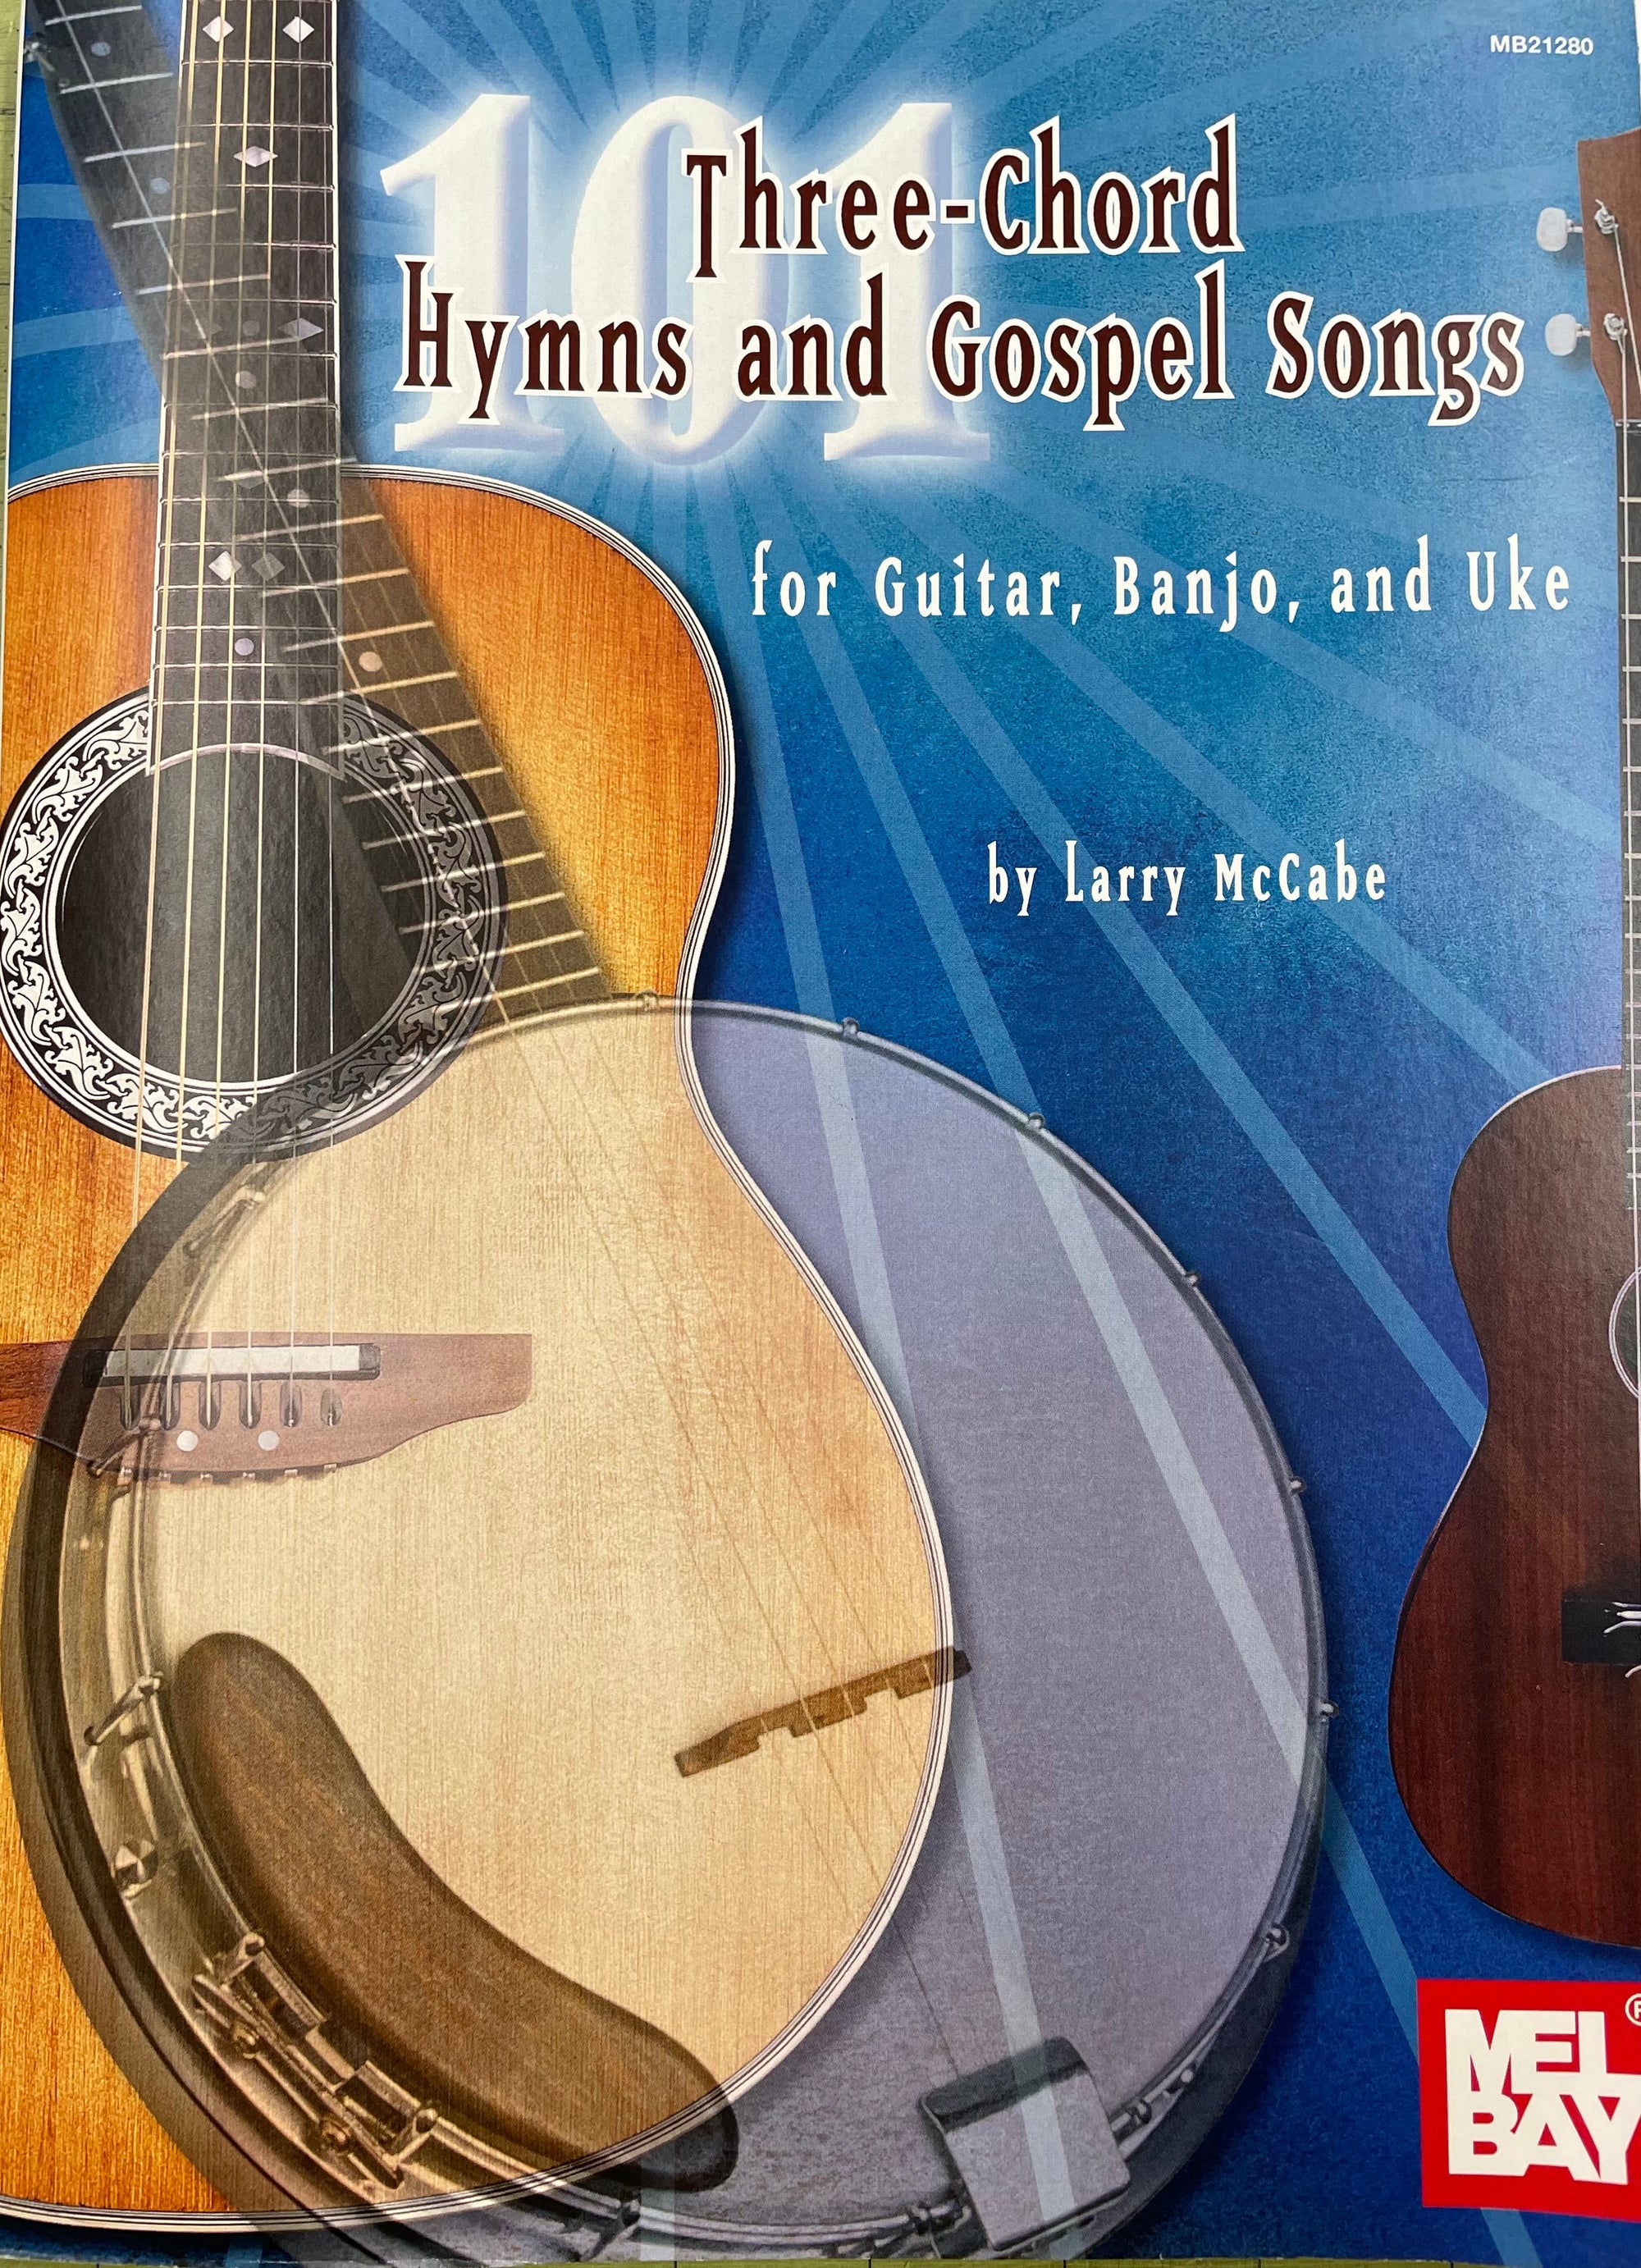 A music book titled "101 Three-Chord Hymns & Gospel Songs for Guitar, Banjo, and Uke" by Larry McCabe featuring images of stringed instruments on the cover and designed to